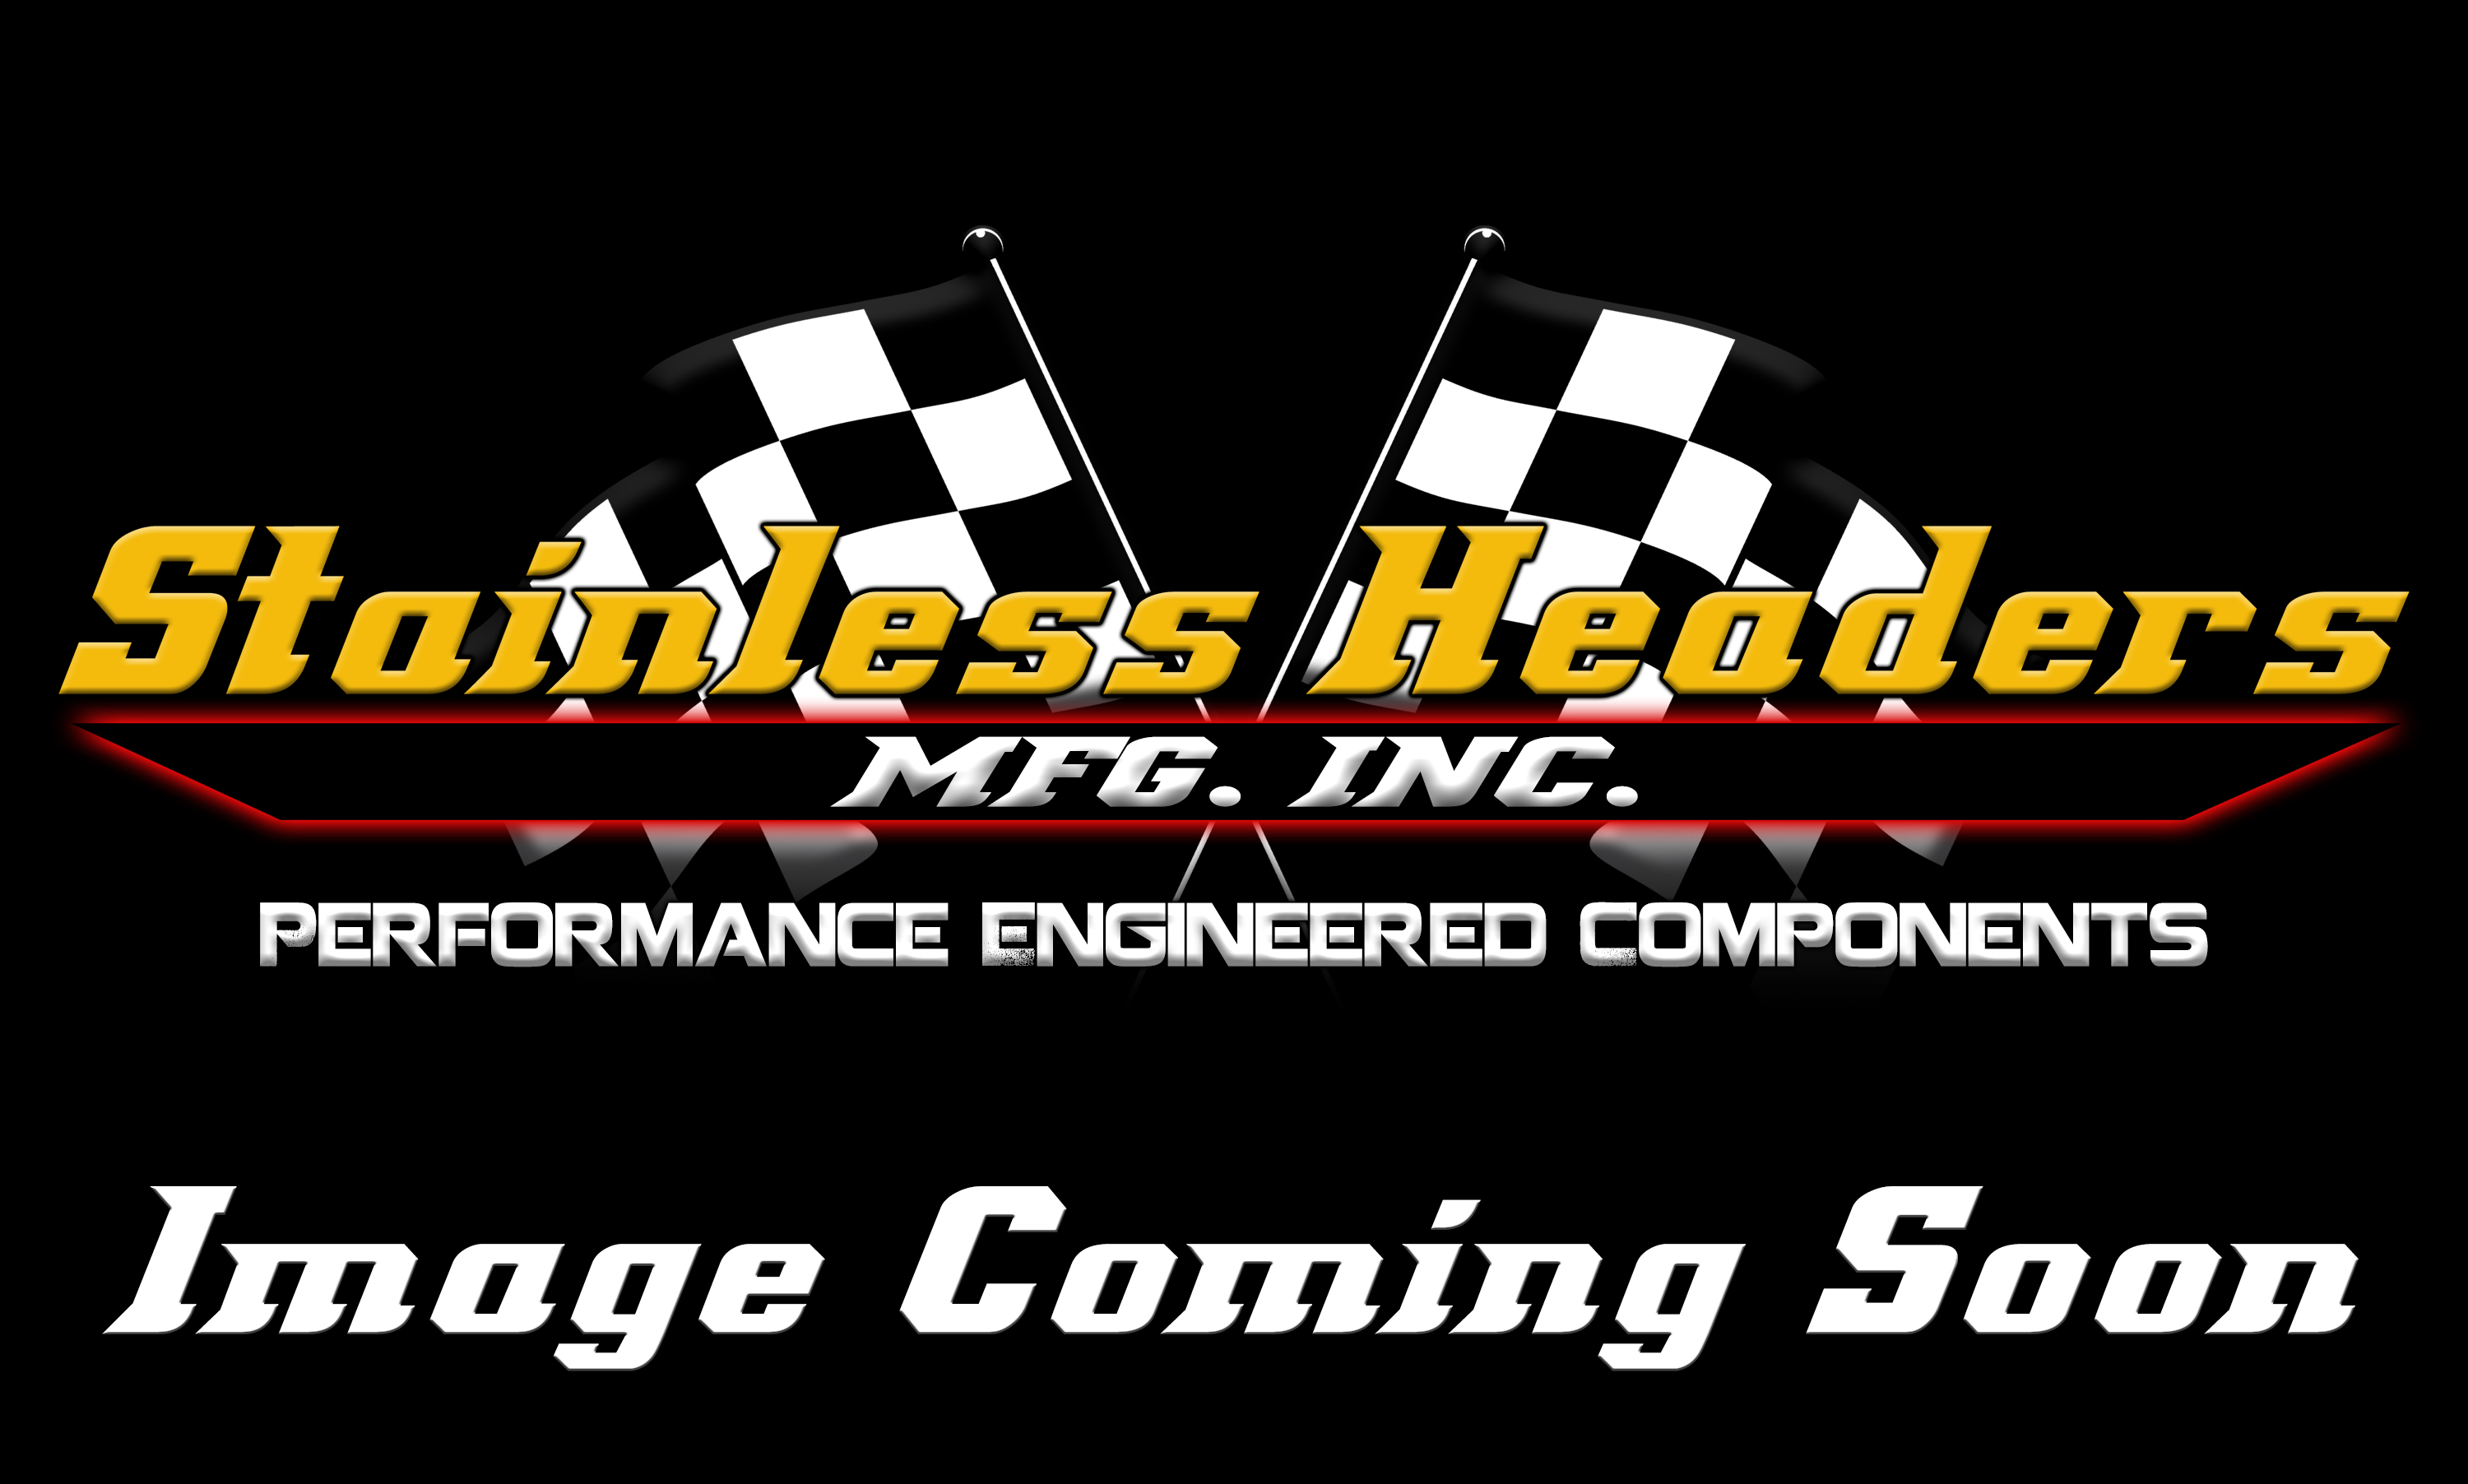 Stainless Headers - 1 7/8" Primary 4 into 1 Performance Merge Collector-16ga 321ss - Image 1